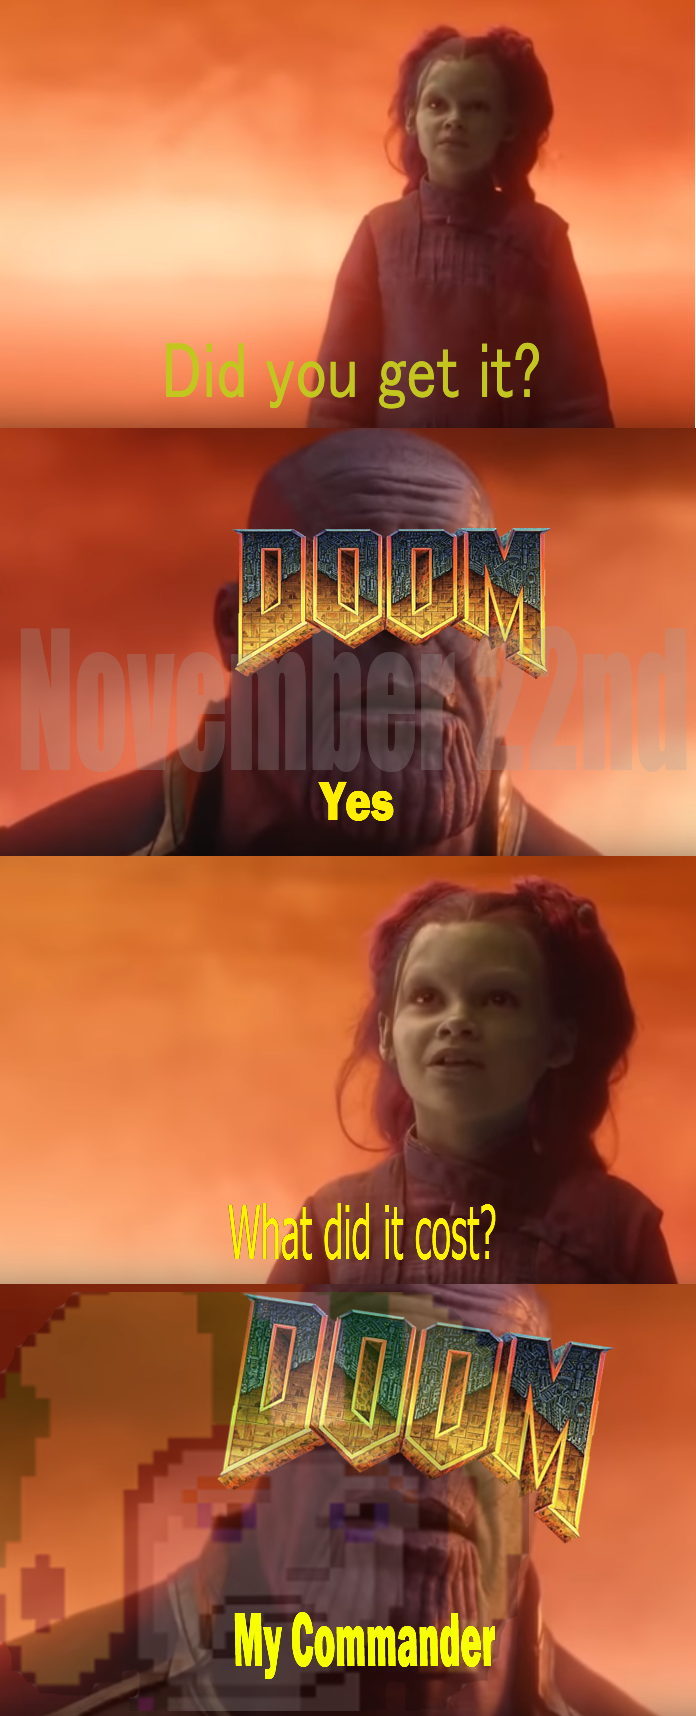 Did you get it? Nowelmbers Yes What did it cost? My Commander